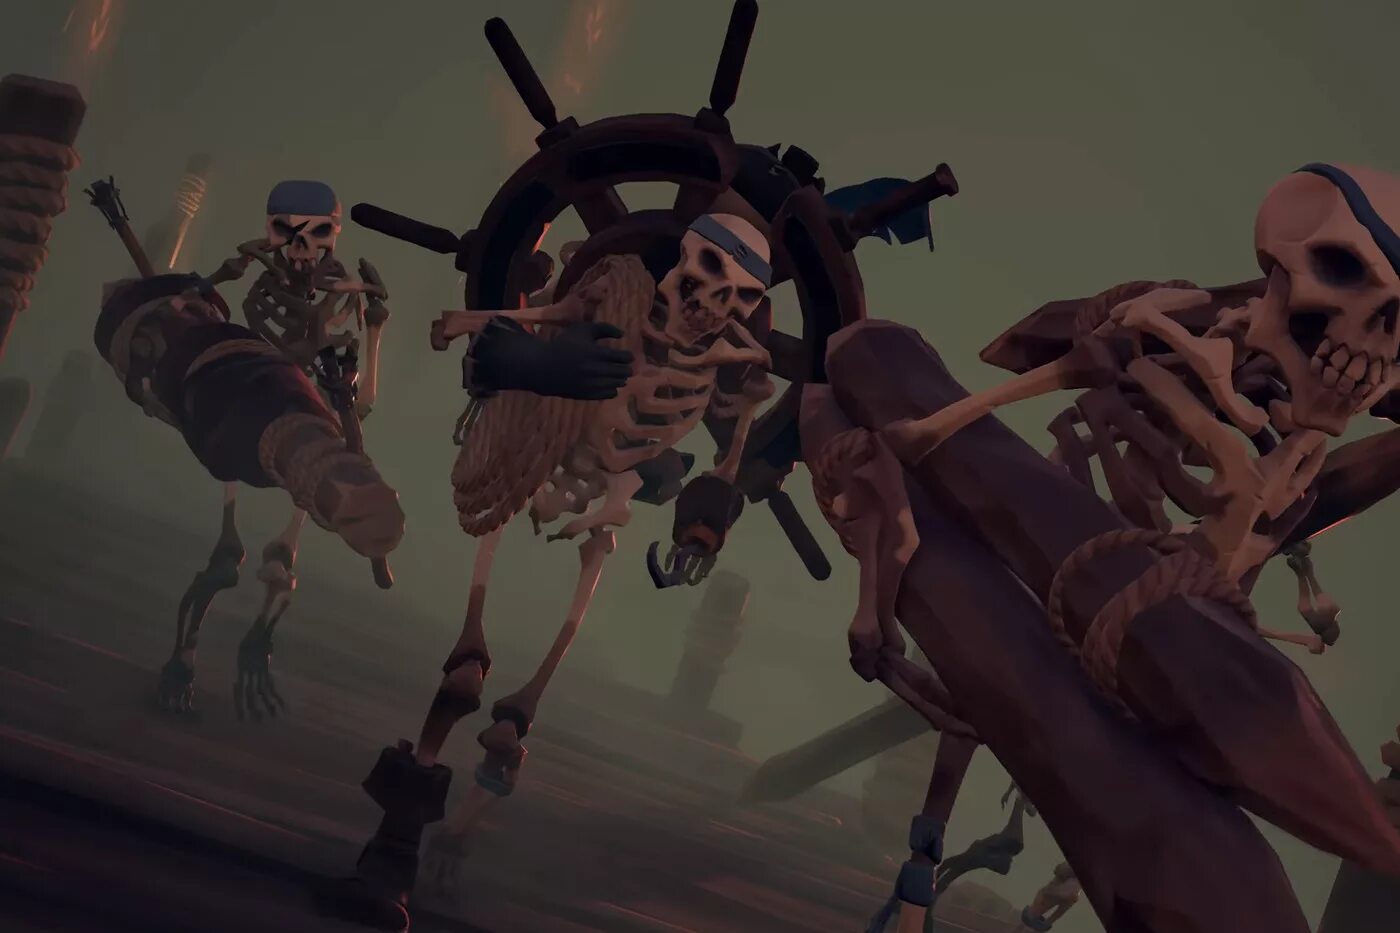 Cursed sea wiki. Sea of Thieves скелеты. Скелет Капитан Sea of Thieves. Армада скелетов Sea of Thieves. Проклятие скелета Sea of Thieves.